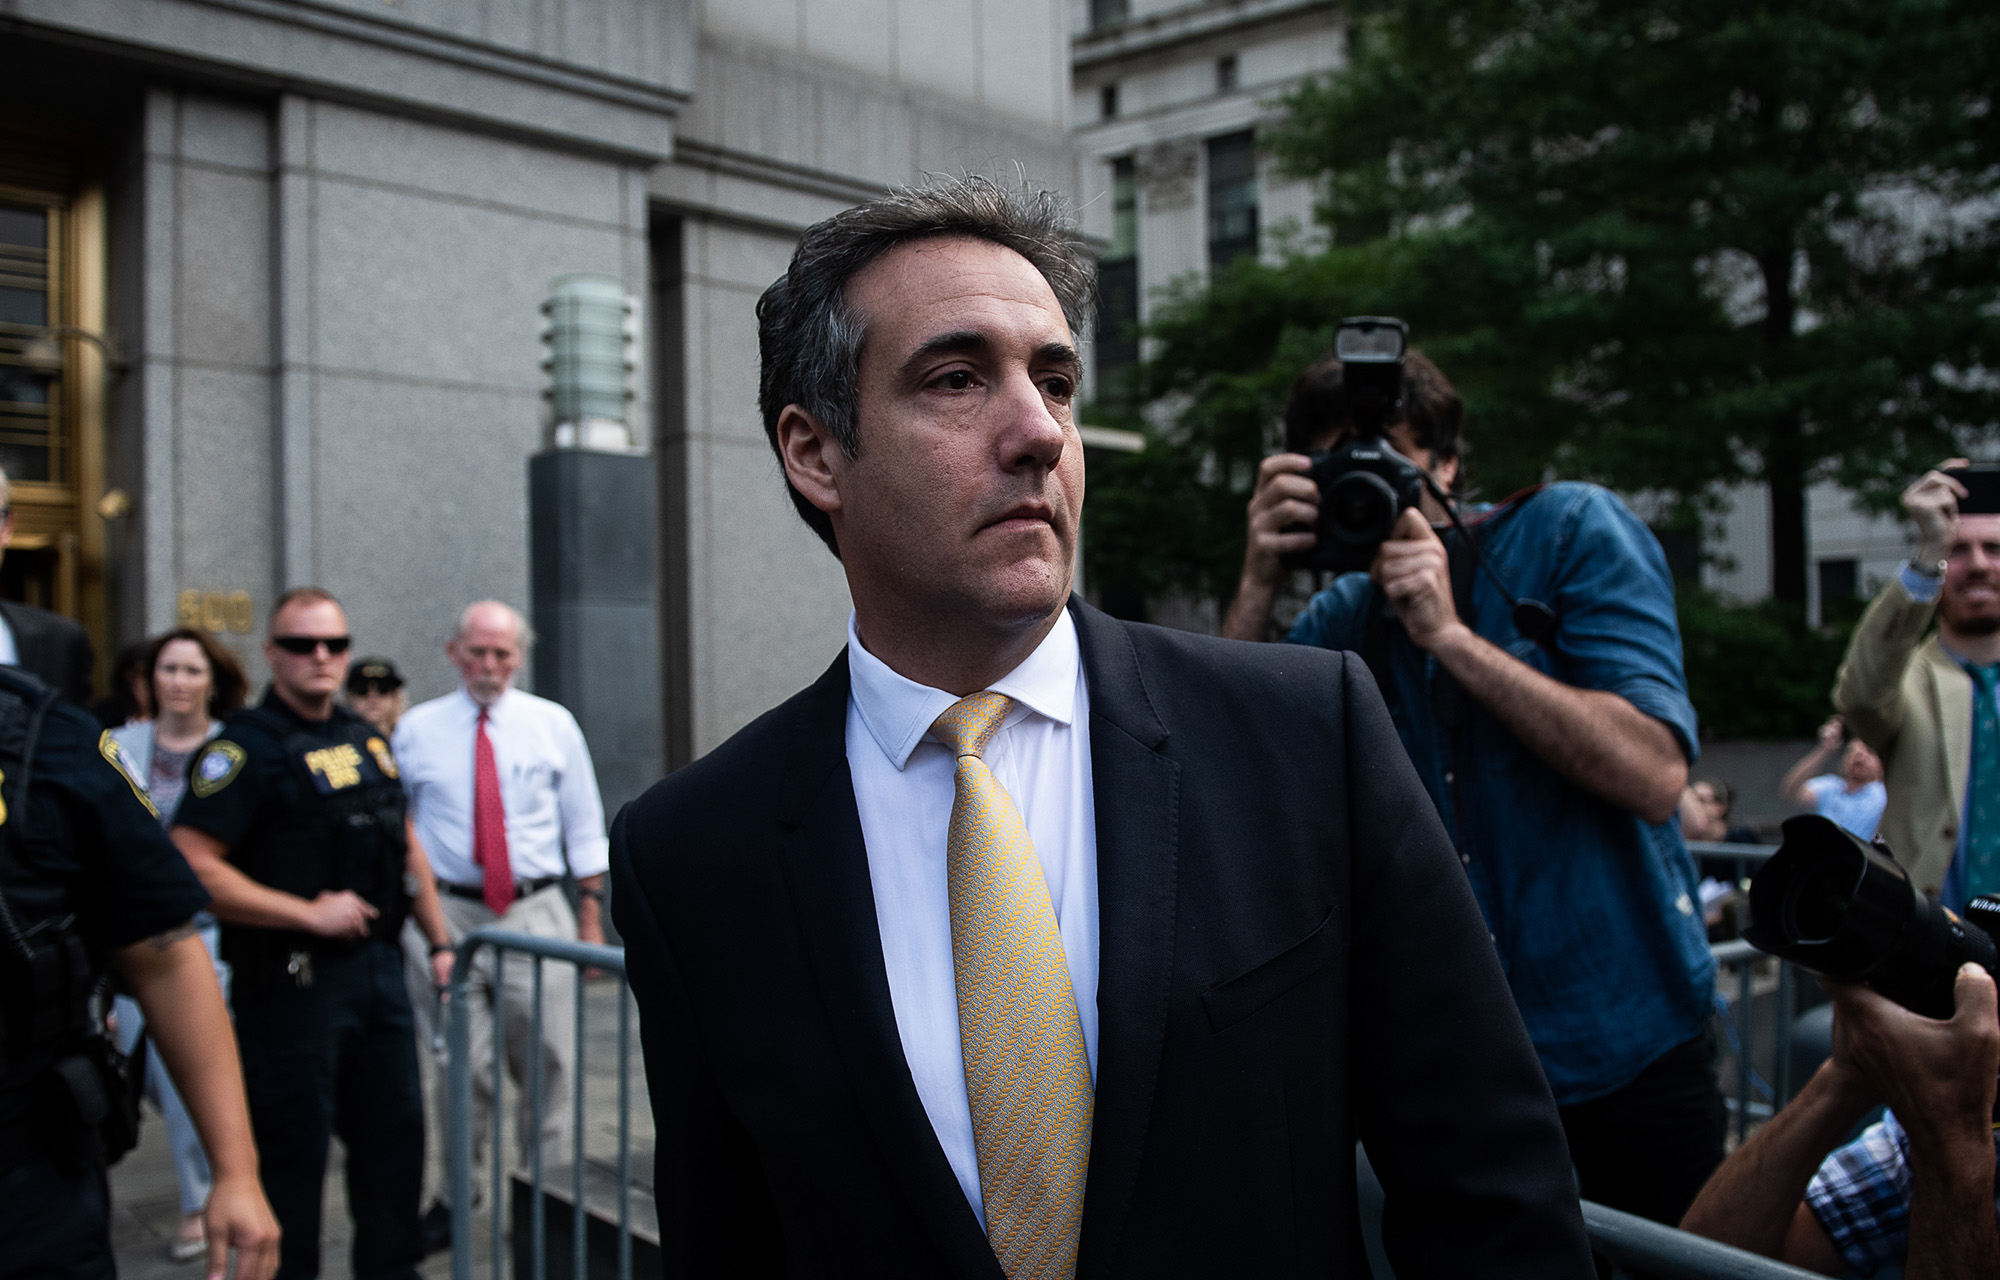 Michael Cohen exits federal court in New York on Aug. 21, 2018.